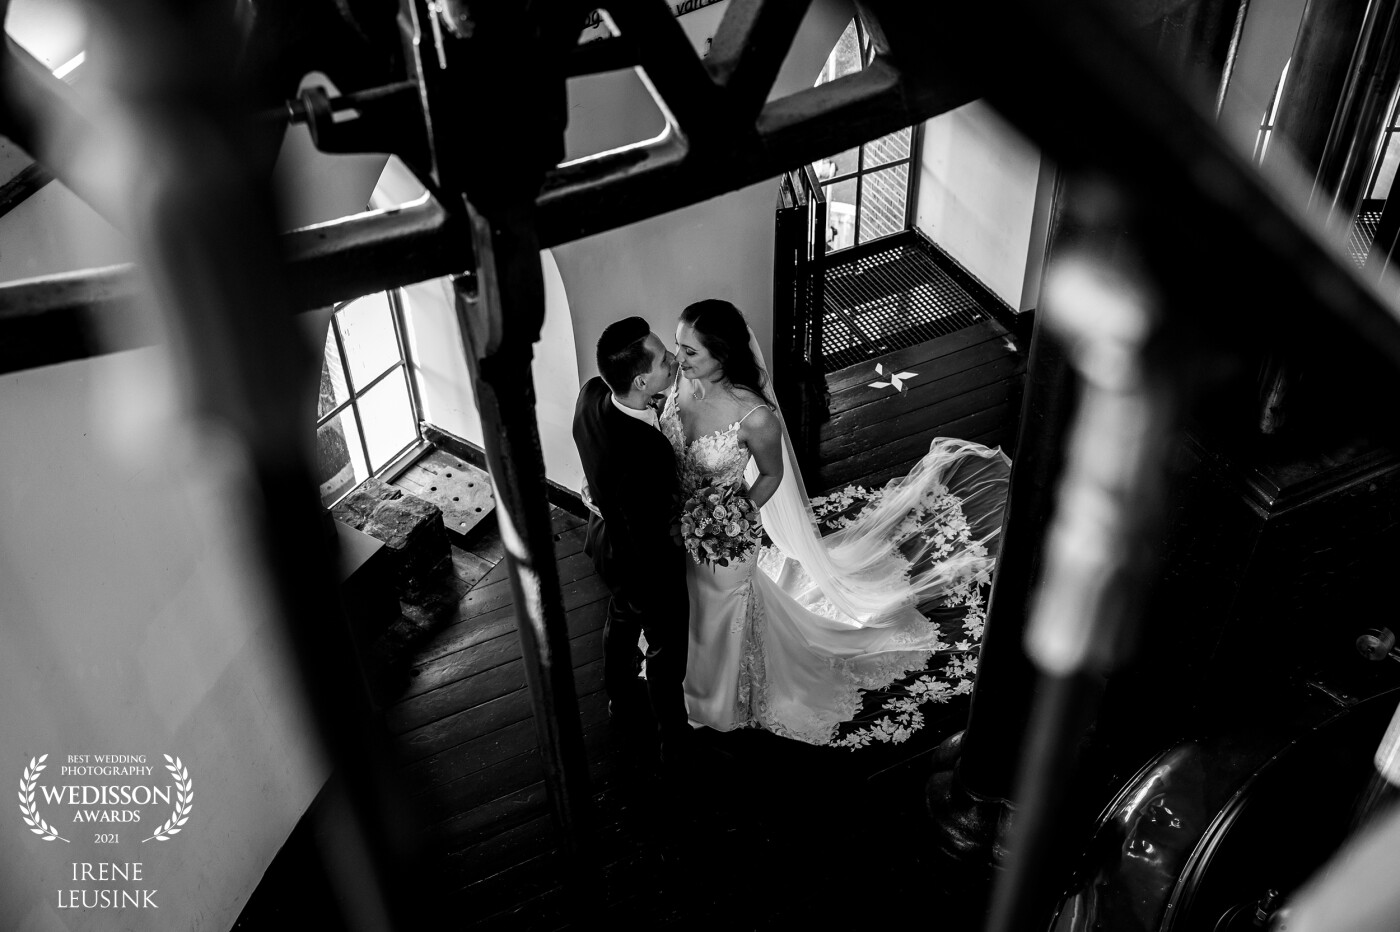 Gemaal De Cruquius is worlds largest steam engine! Because this wedding took place in October, the bride and groom had arranged this wonderful location. Using a very old staircase I could take this picture form an interesting angle.